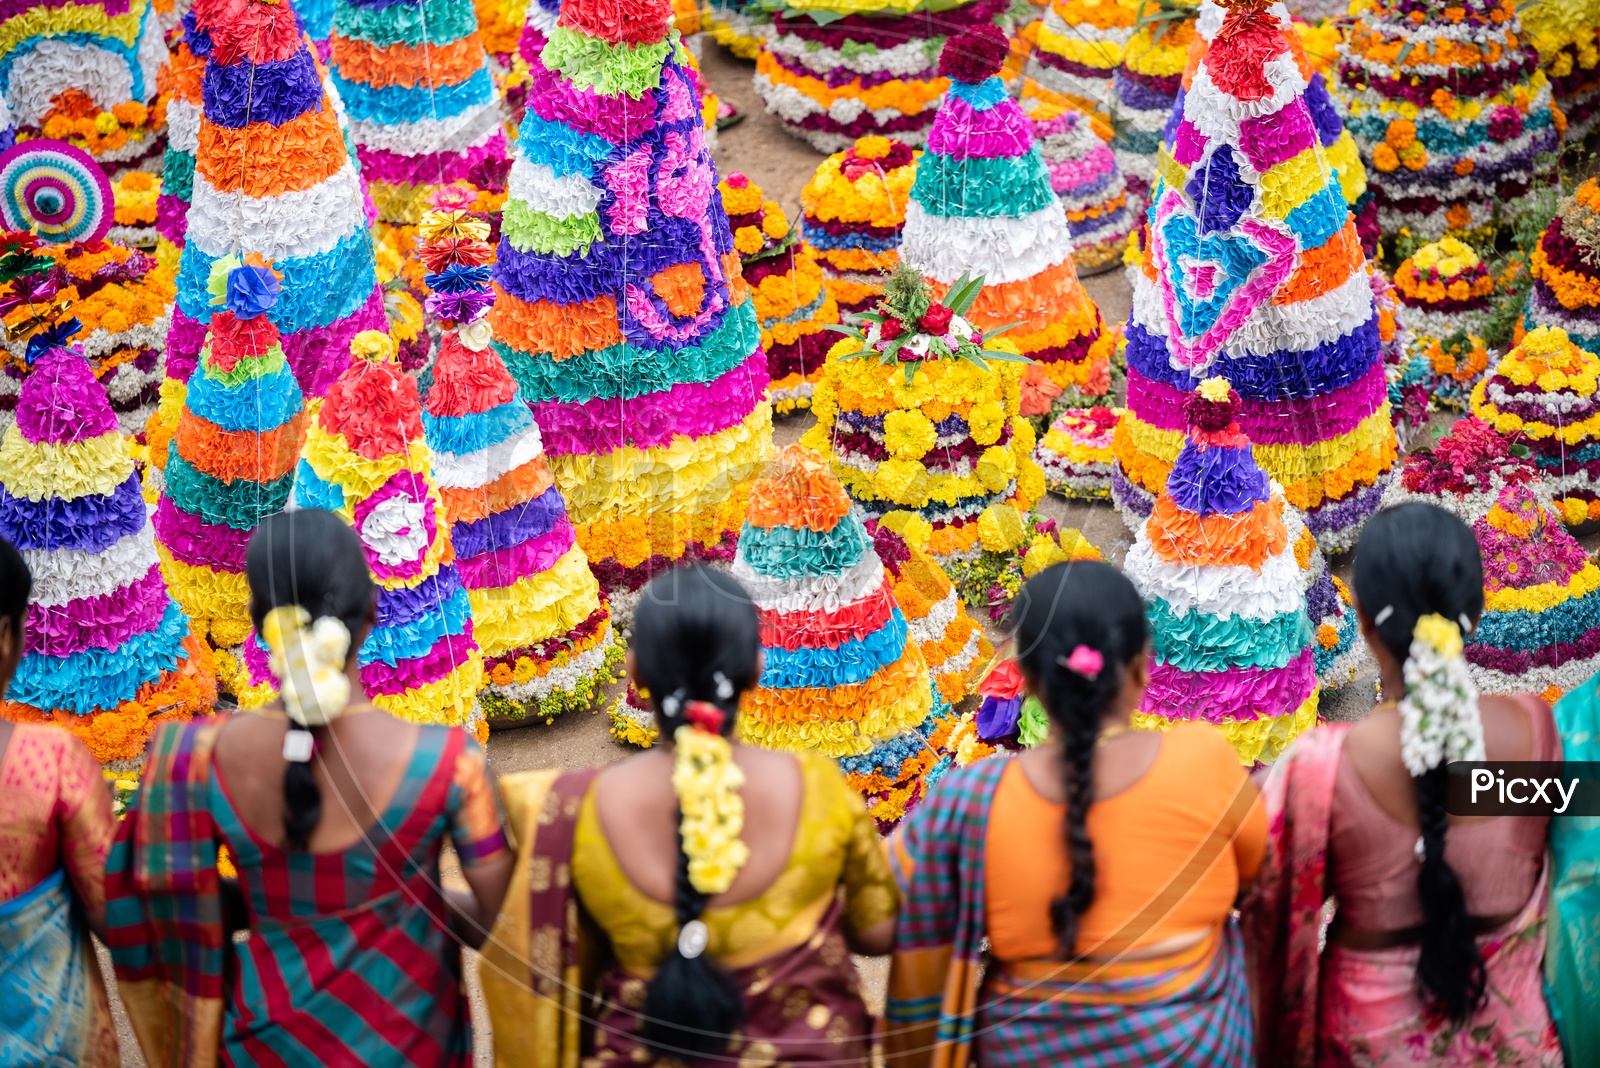 Women of Telangana celebrate Bathukamma by making Floral decoration s and dancing in front of them.